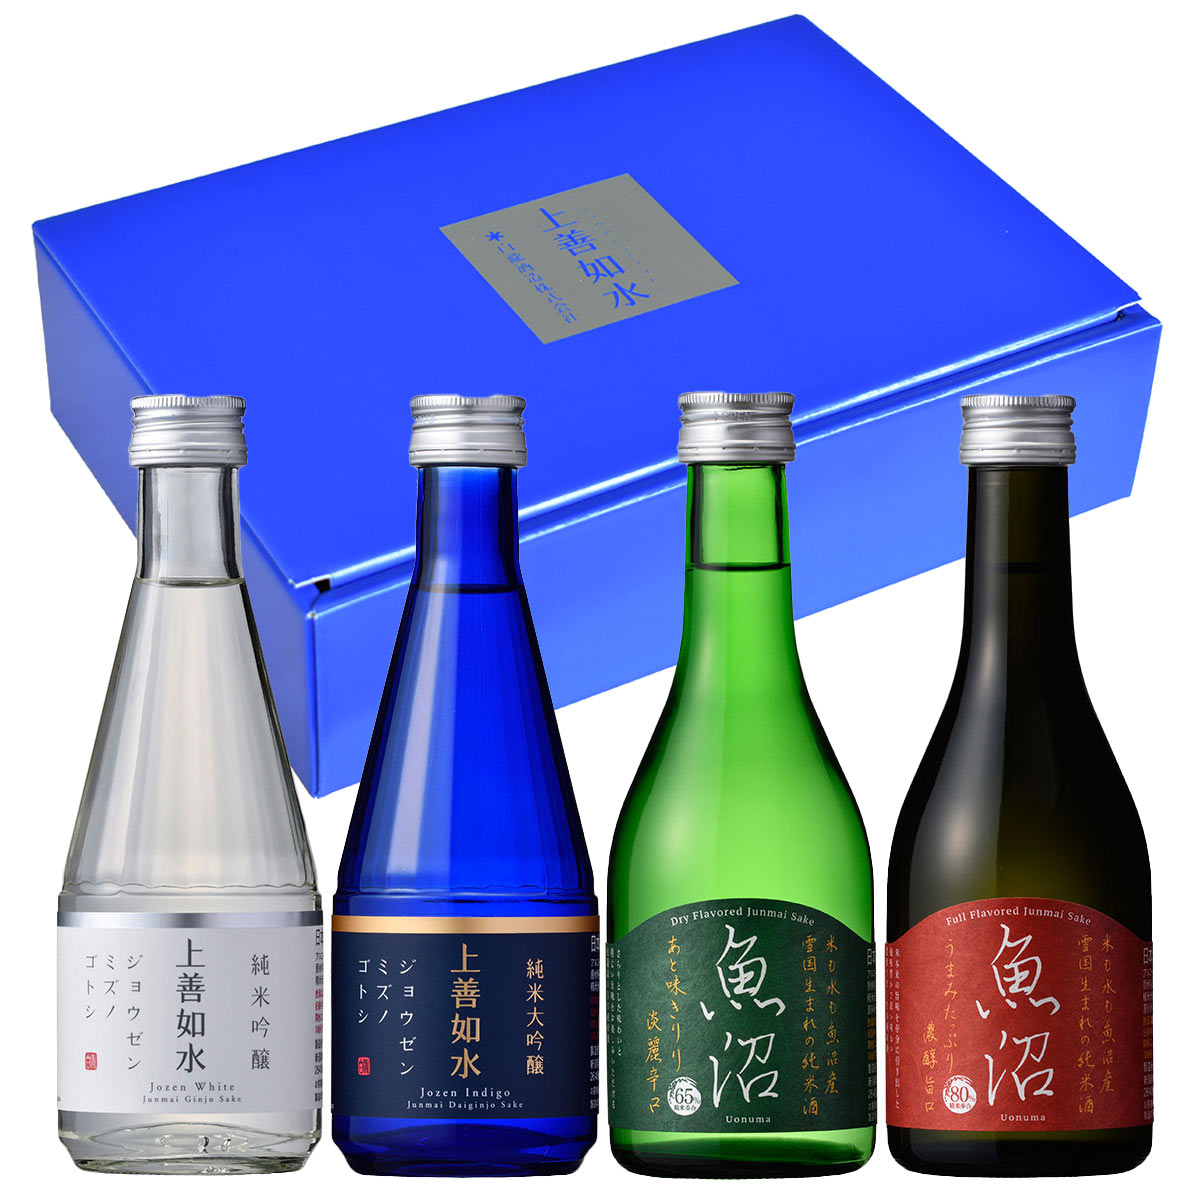 <span  ><span style='font-weight:bold;color:#666;'>上善如水×魚沼 飲み比べセット 300ml×4本入り</span></span><br>3,500円<span style='font-size:10px' >(税込)</span>